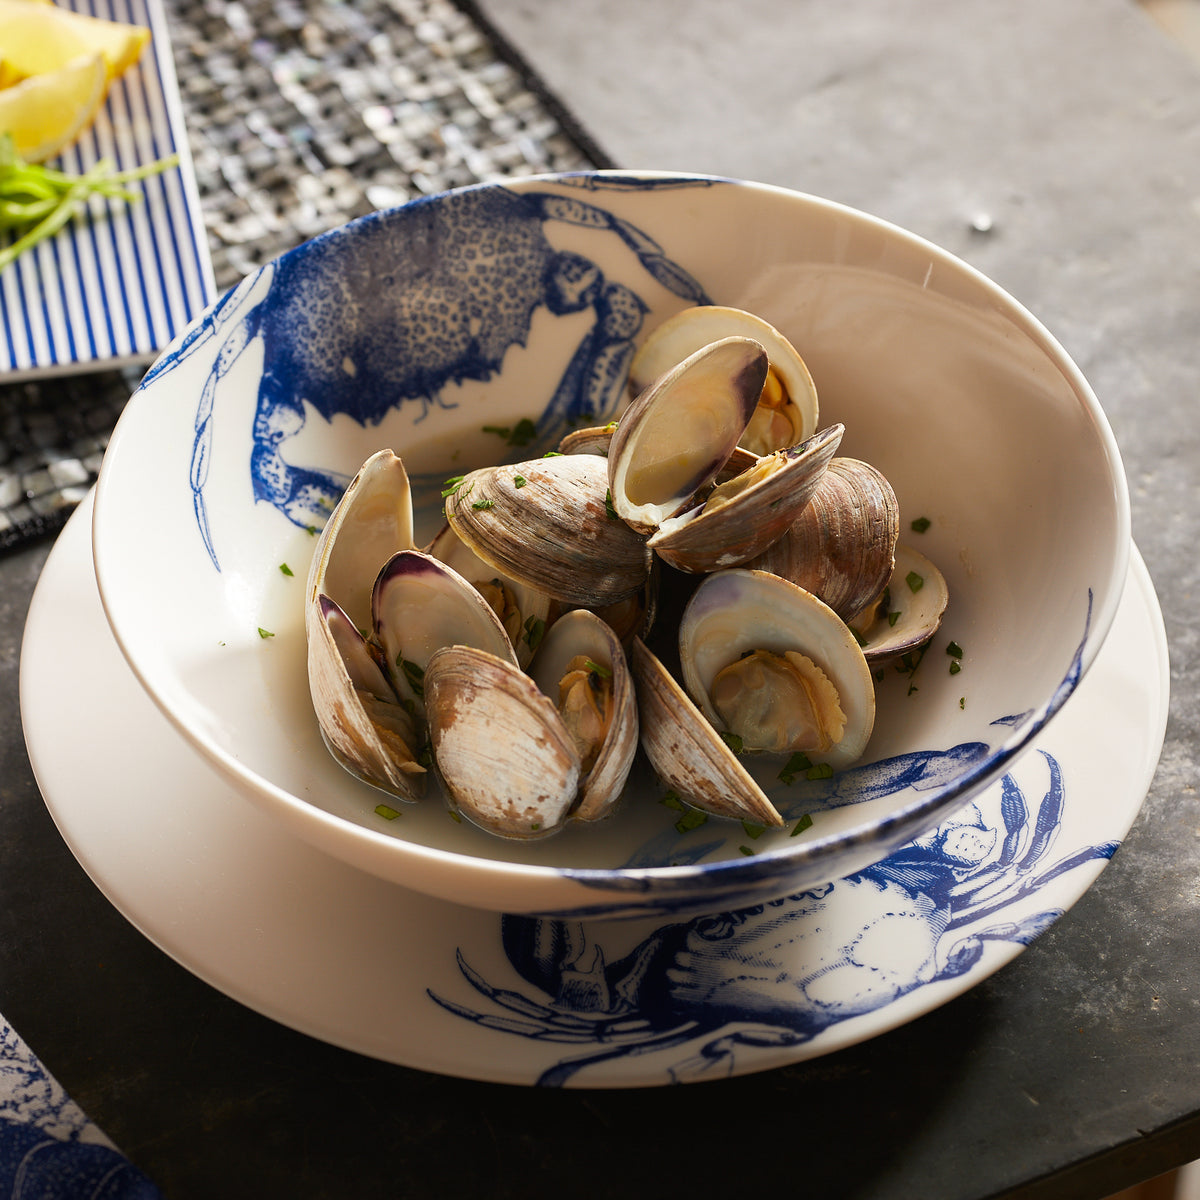 A bowl of cooked clams served in a white dish adorned with a charming crab pattern, placed on a matching plate with part of a lemon wedge visible in the background. This high-fired porcelain set, the Crab Entrée Bowl by Caskata Artisanal Home, is both dishwasher and microwave safe, ensuring convenience and durability.